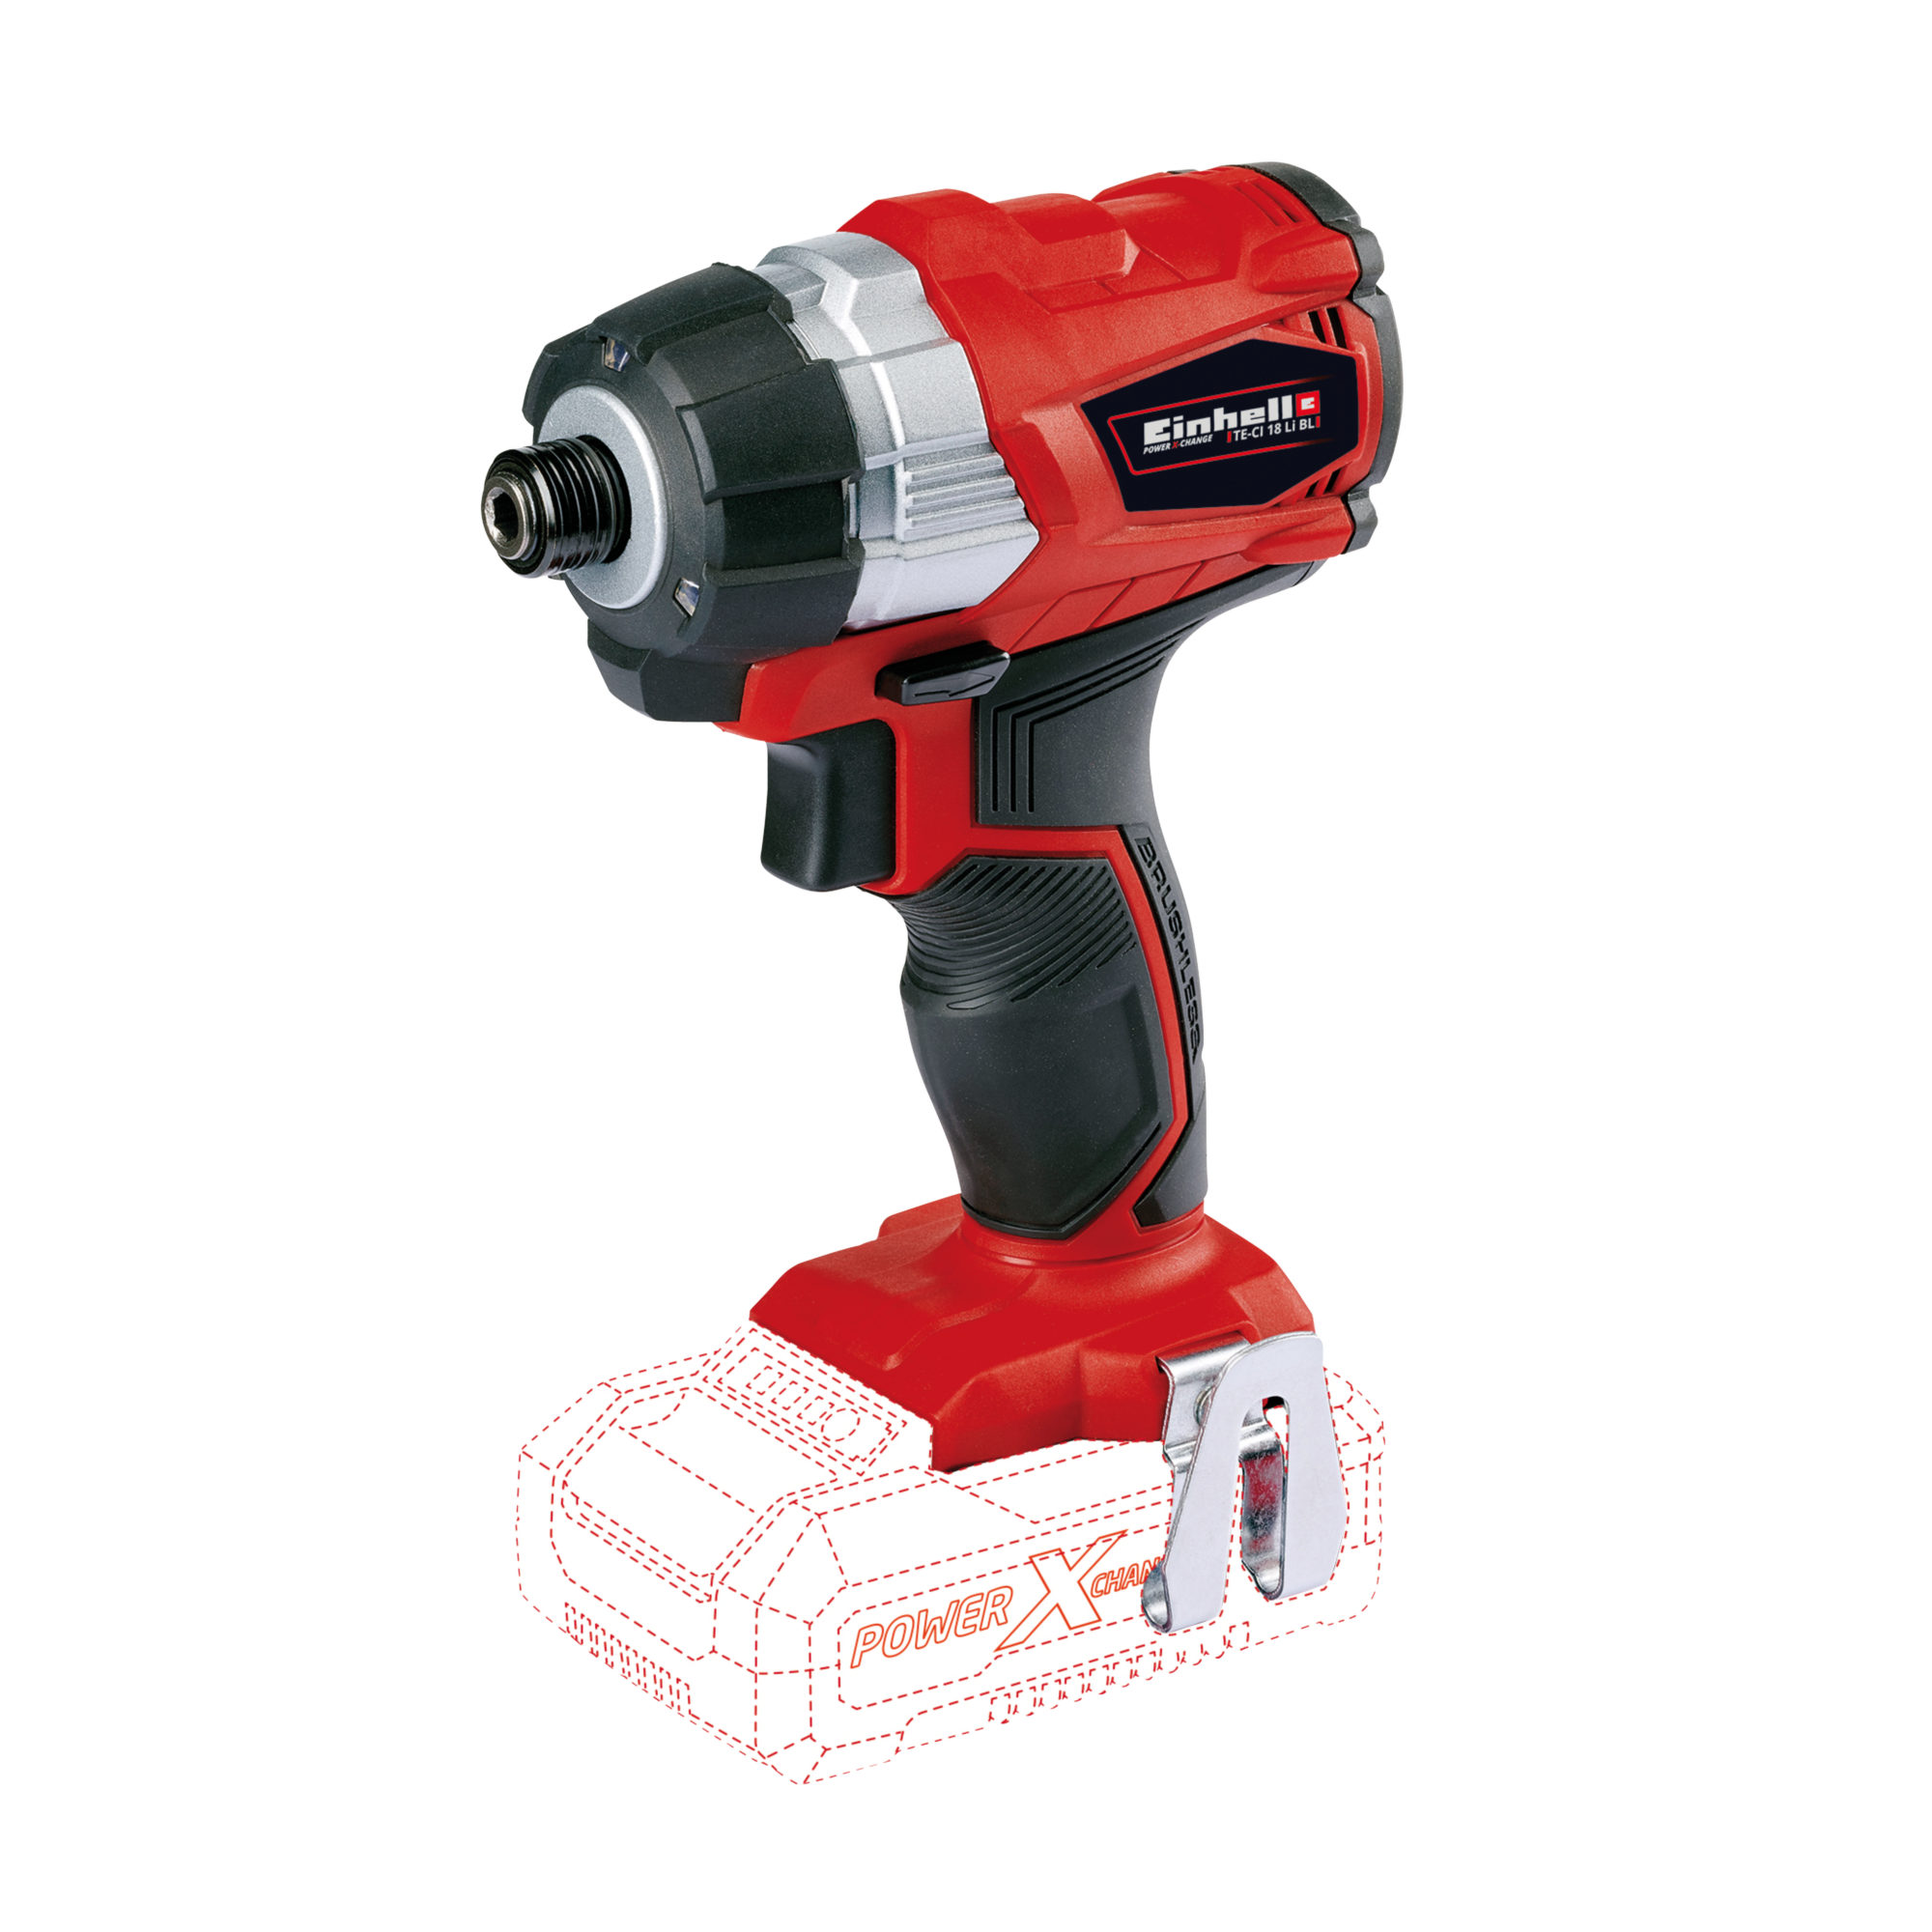 Brushless-Solo, Cordless Impact Driver